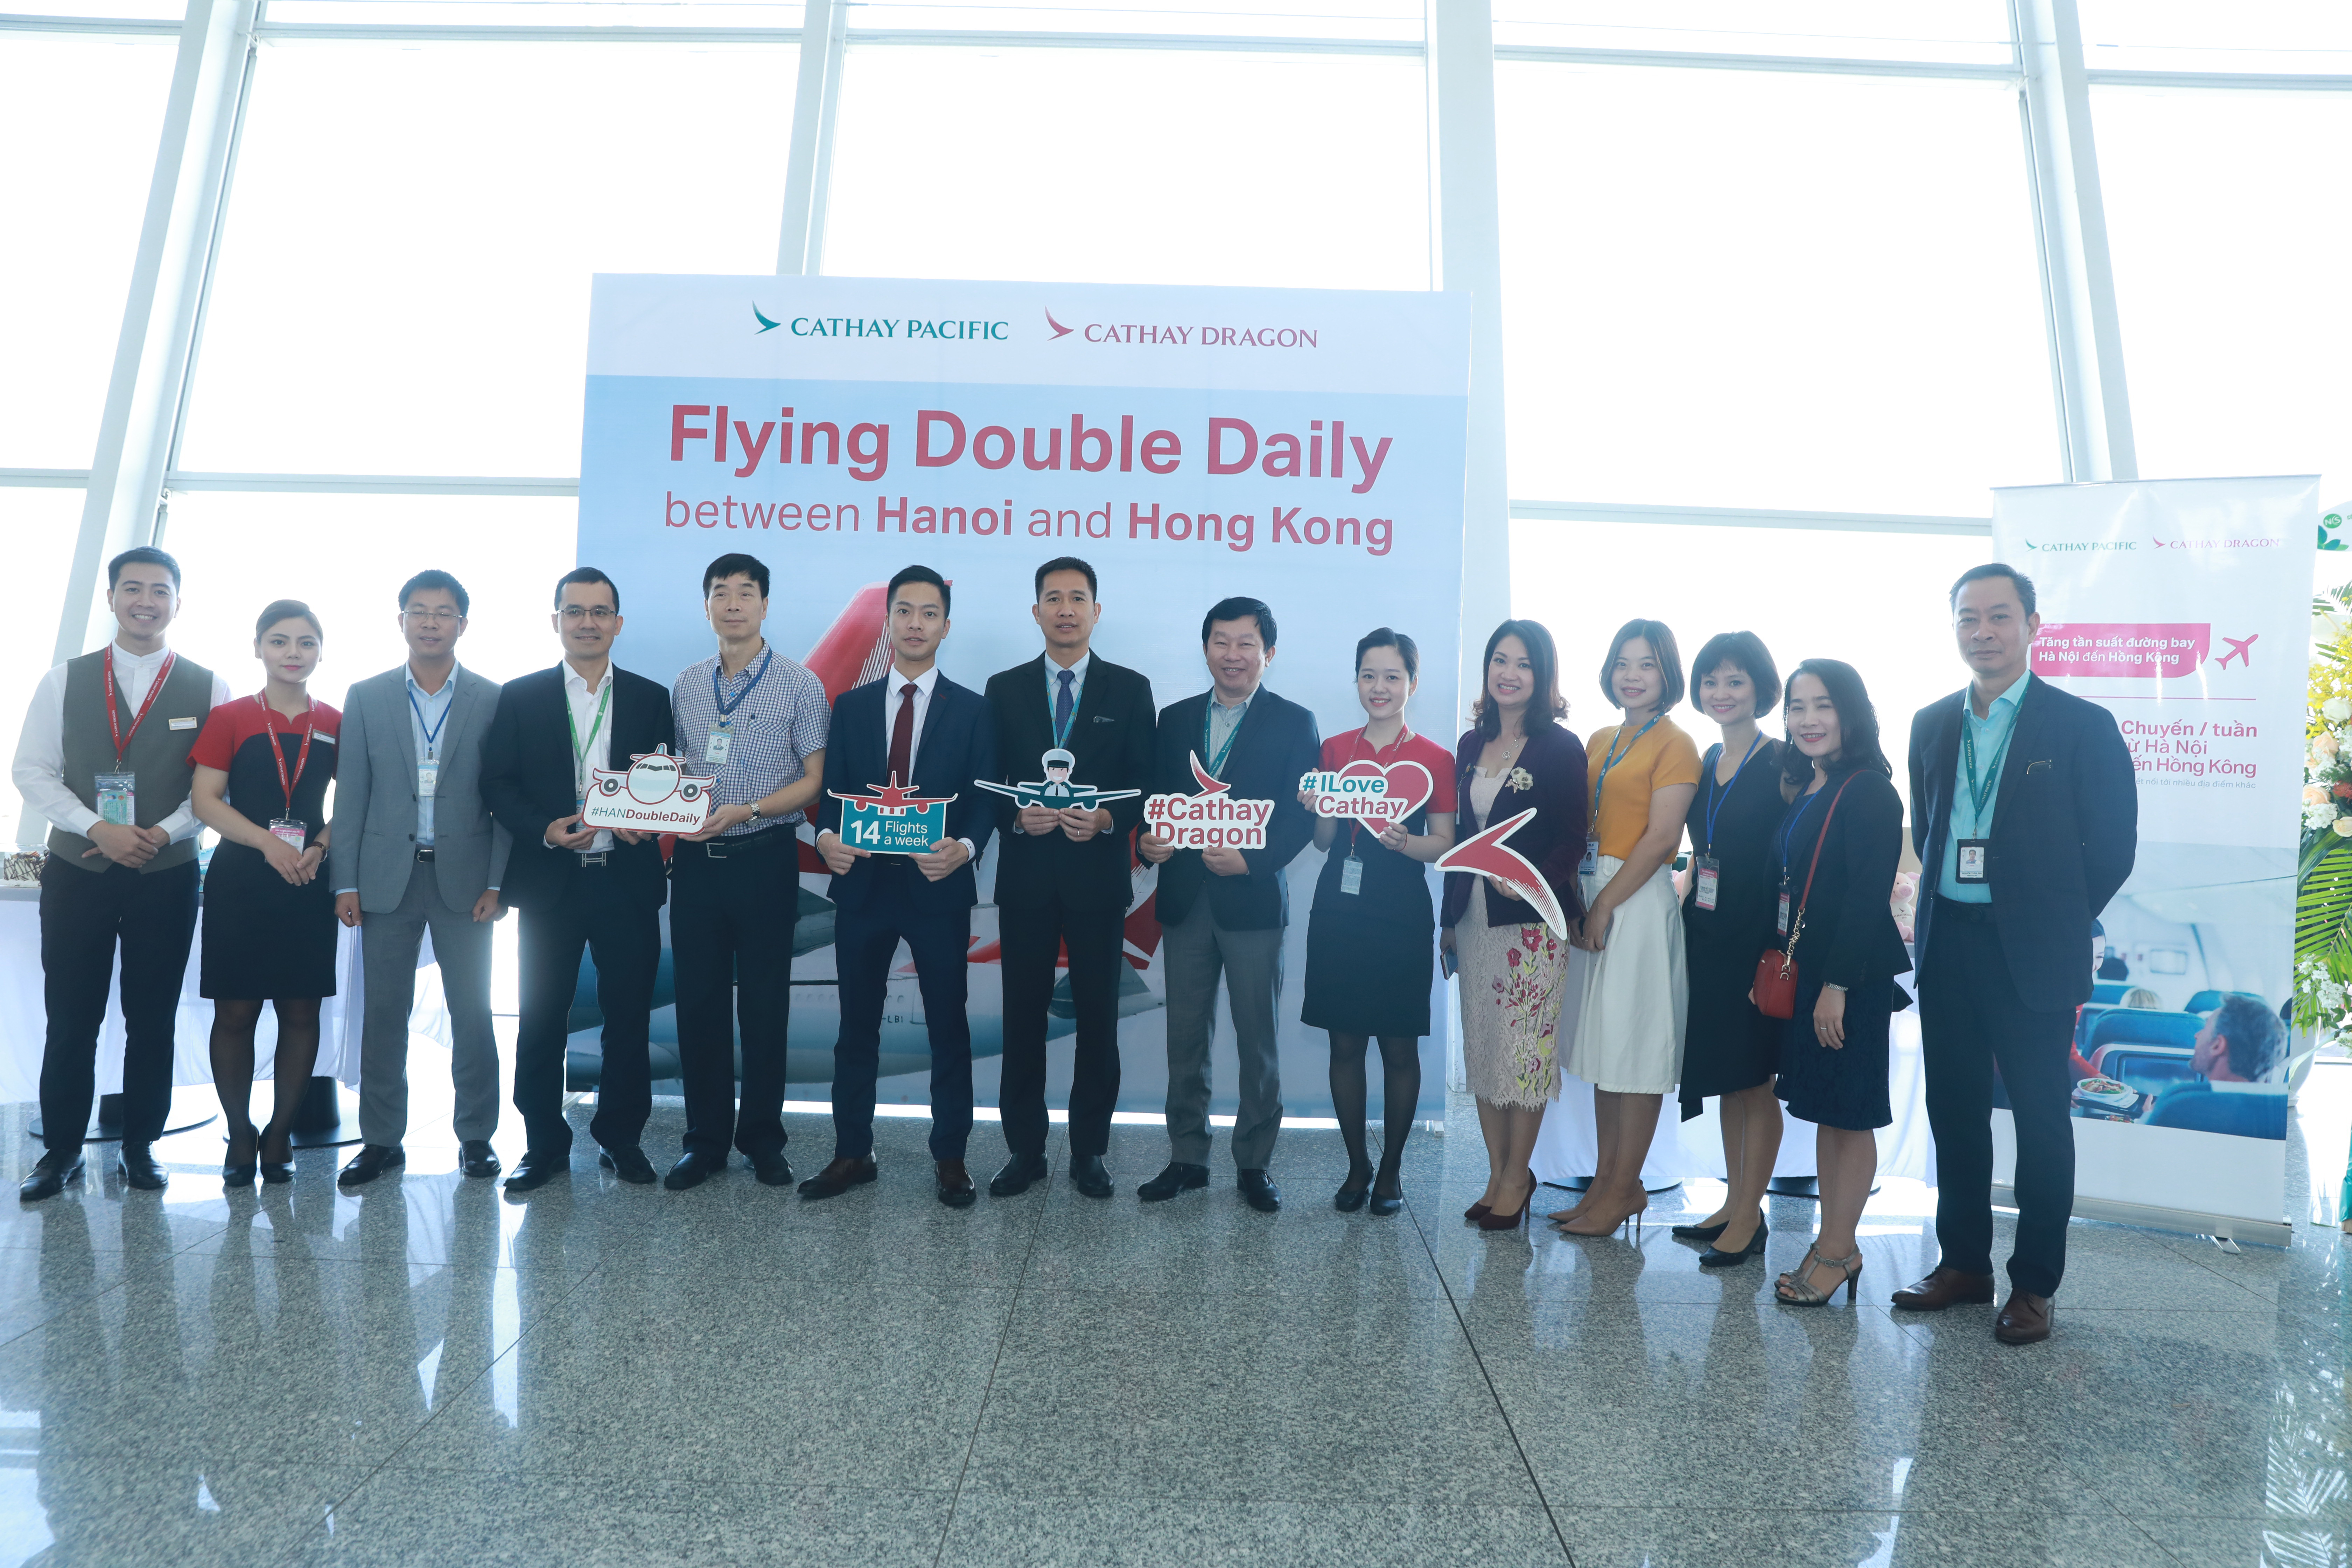 VIAGS Noi Bai jointly celebrate Cathay Dragon's increase of flight frequencies between Hong Kong and Hanoi